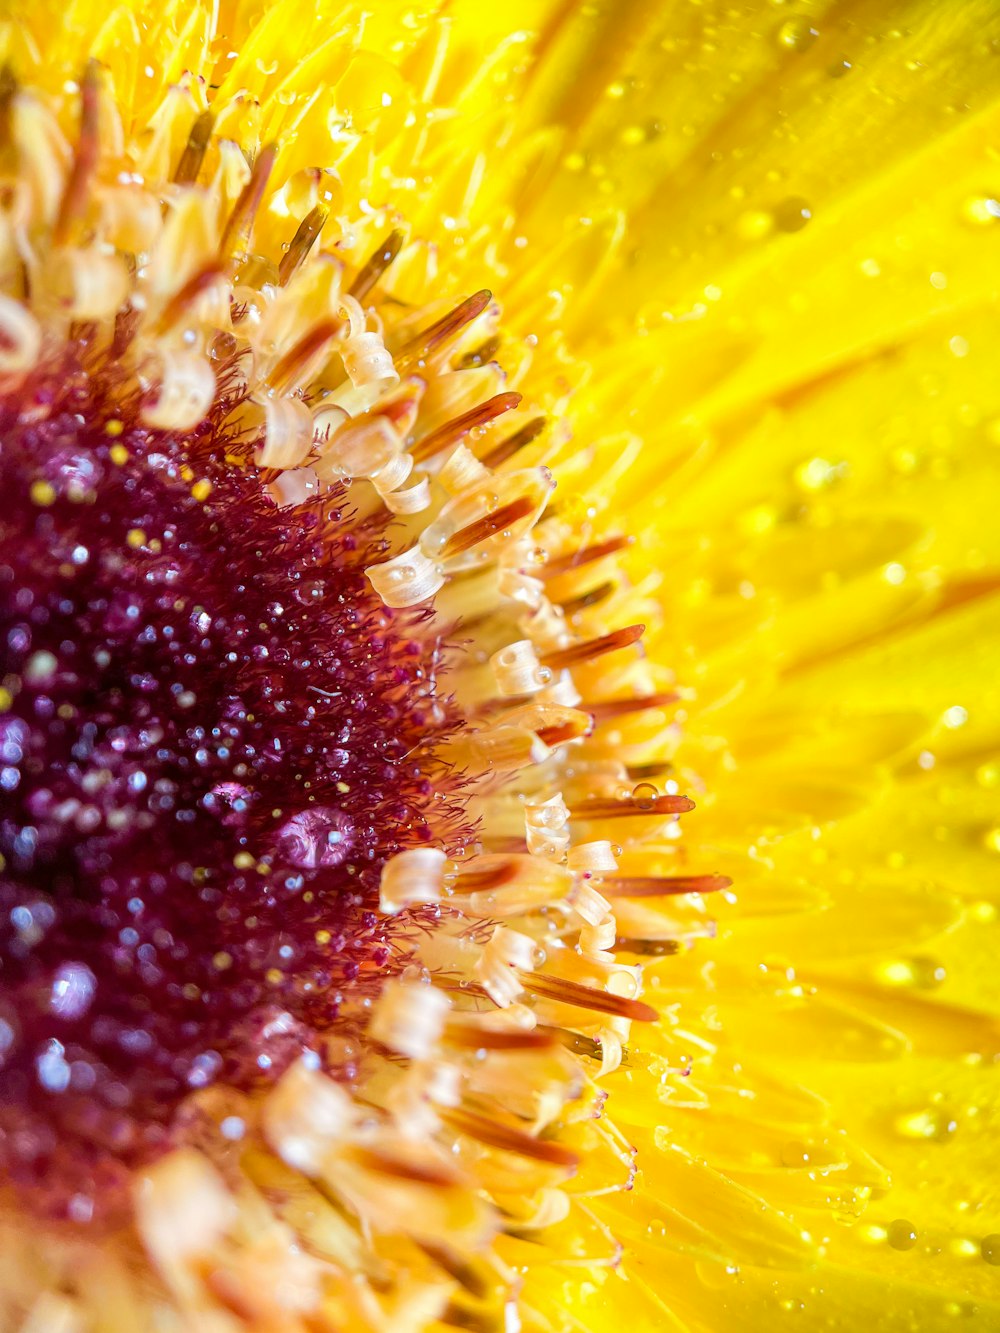 a close up of a yellow flower with drops of water on it